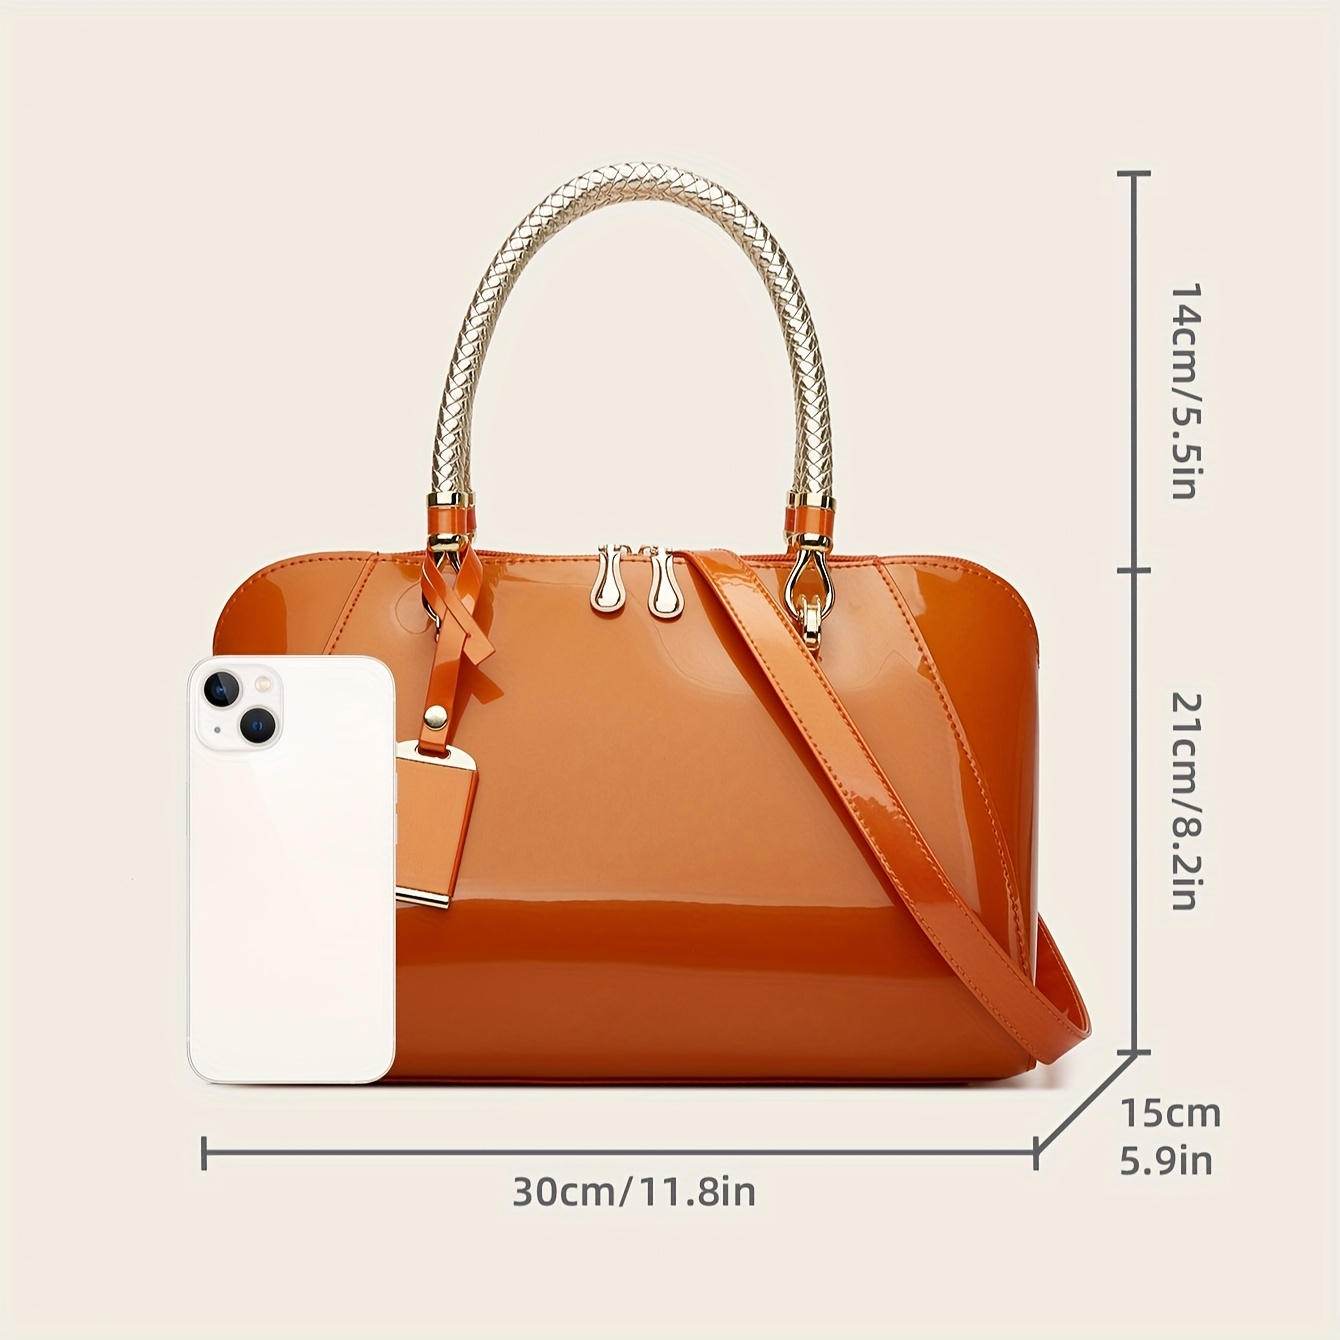 Shiny Patent Top Handle Satchel Classic Boston Tote Bag Womens Casual  Fashion Handbag Purse, Check Out Today's Deals Now